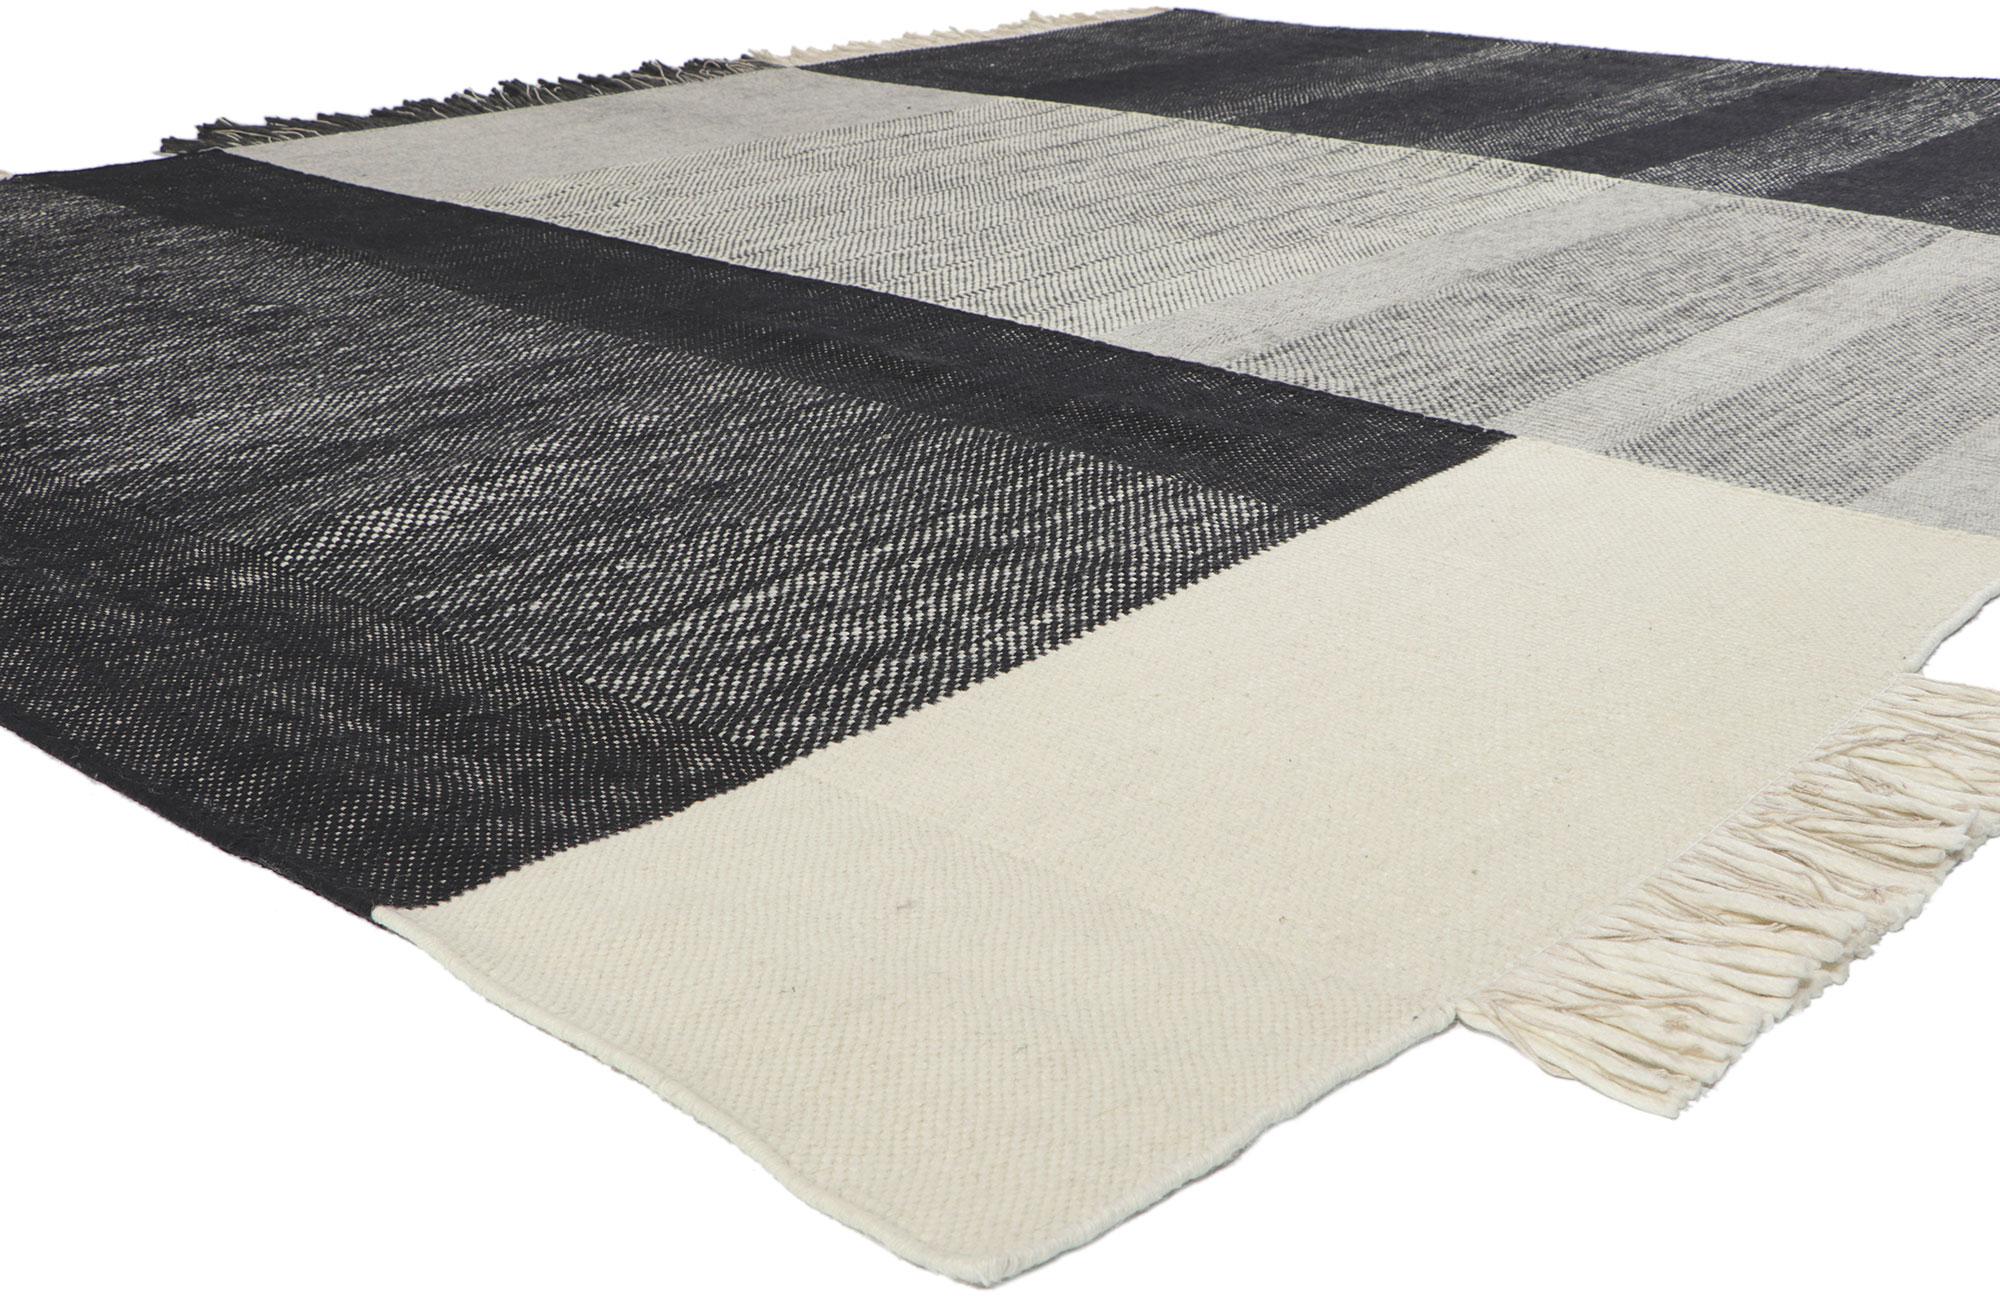 30902 Organic Modern Indian Kilim Rug, 08'09 x 12'00.
​Natural elegance meets timeless style in this handwoven organic modern indian kilim rug.​
In the style of Tres Rug from Nanimarquina.
Abrash.
Handwoven wool.
Made in India.
Measures: 08'09 x